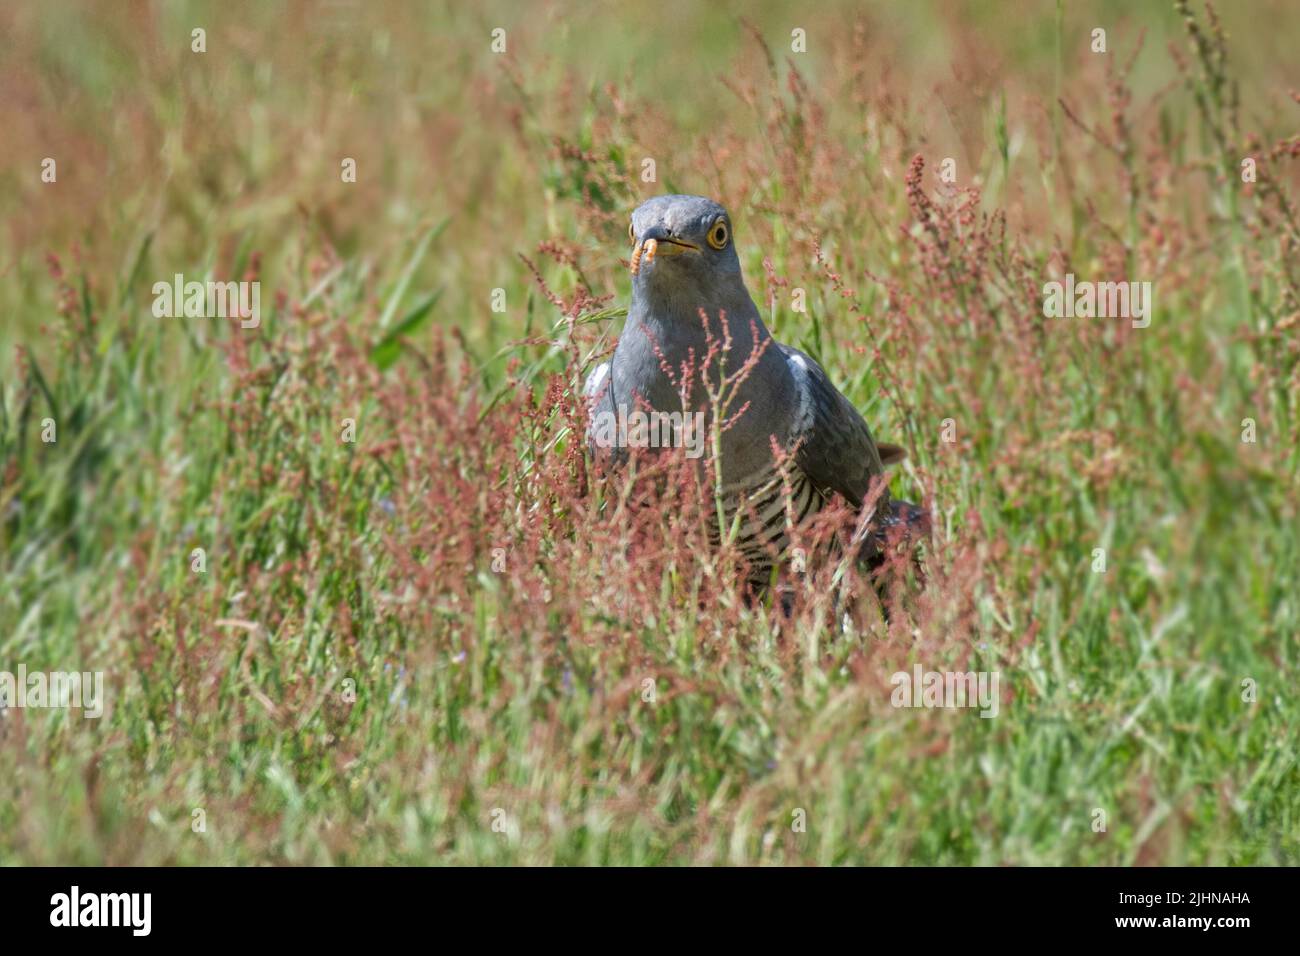 A common cuckoo is standing in long grass with a worm in its beak Stock Photo